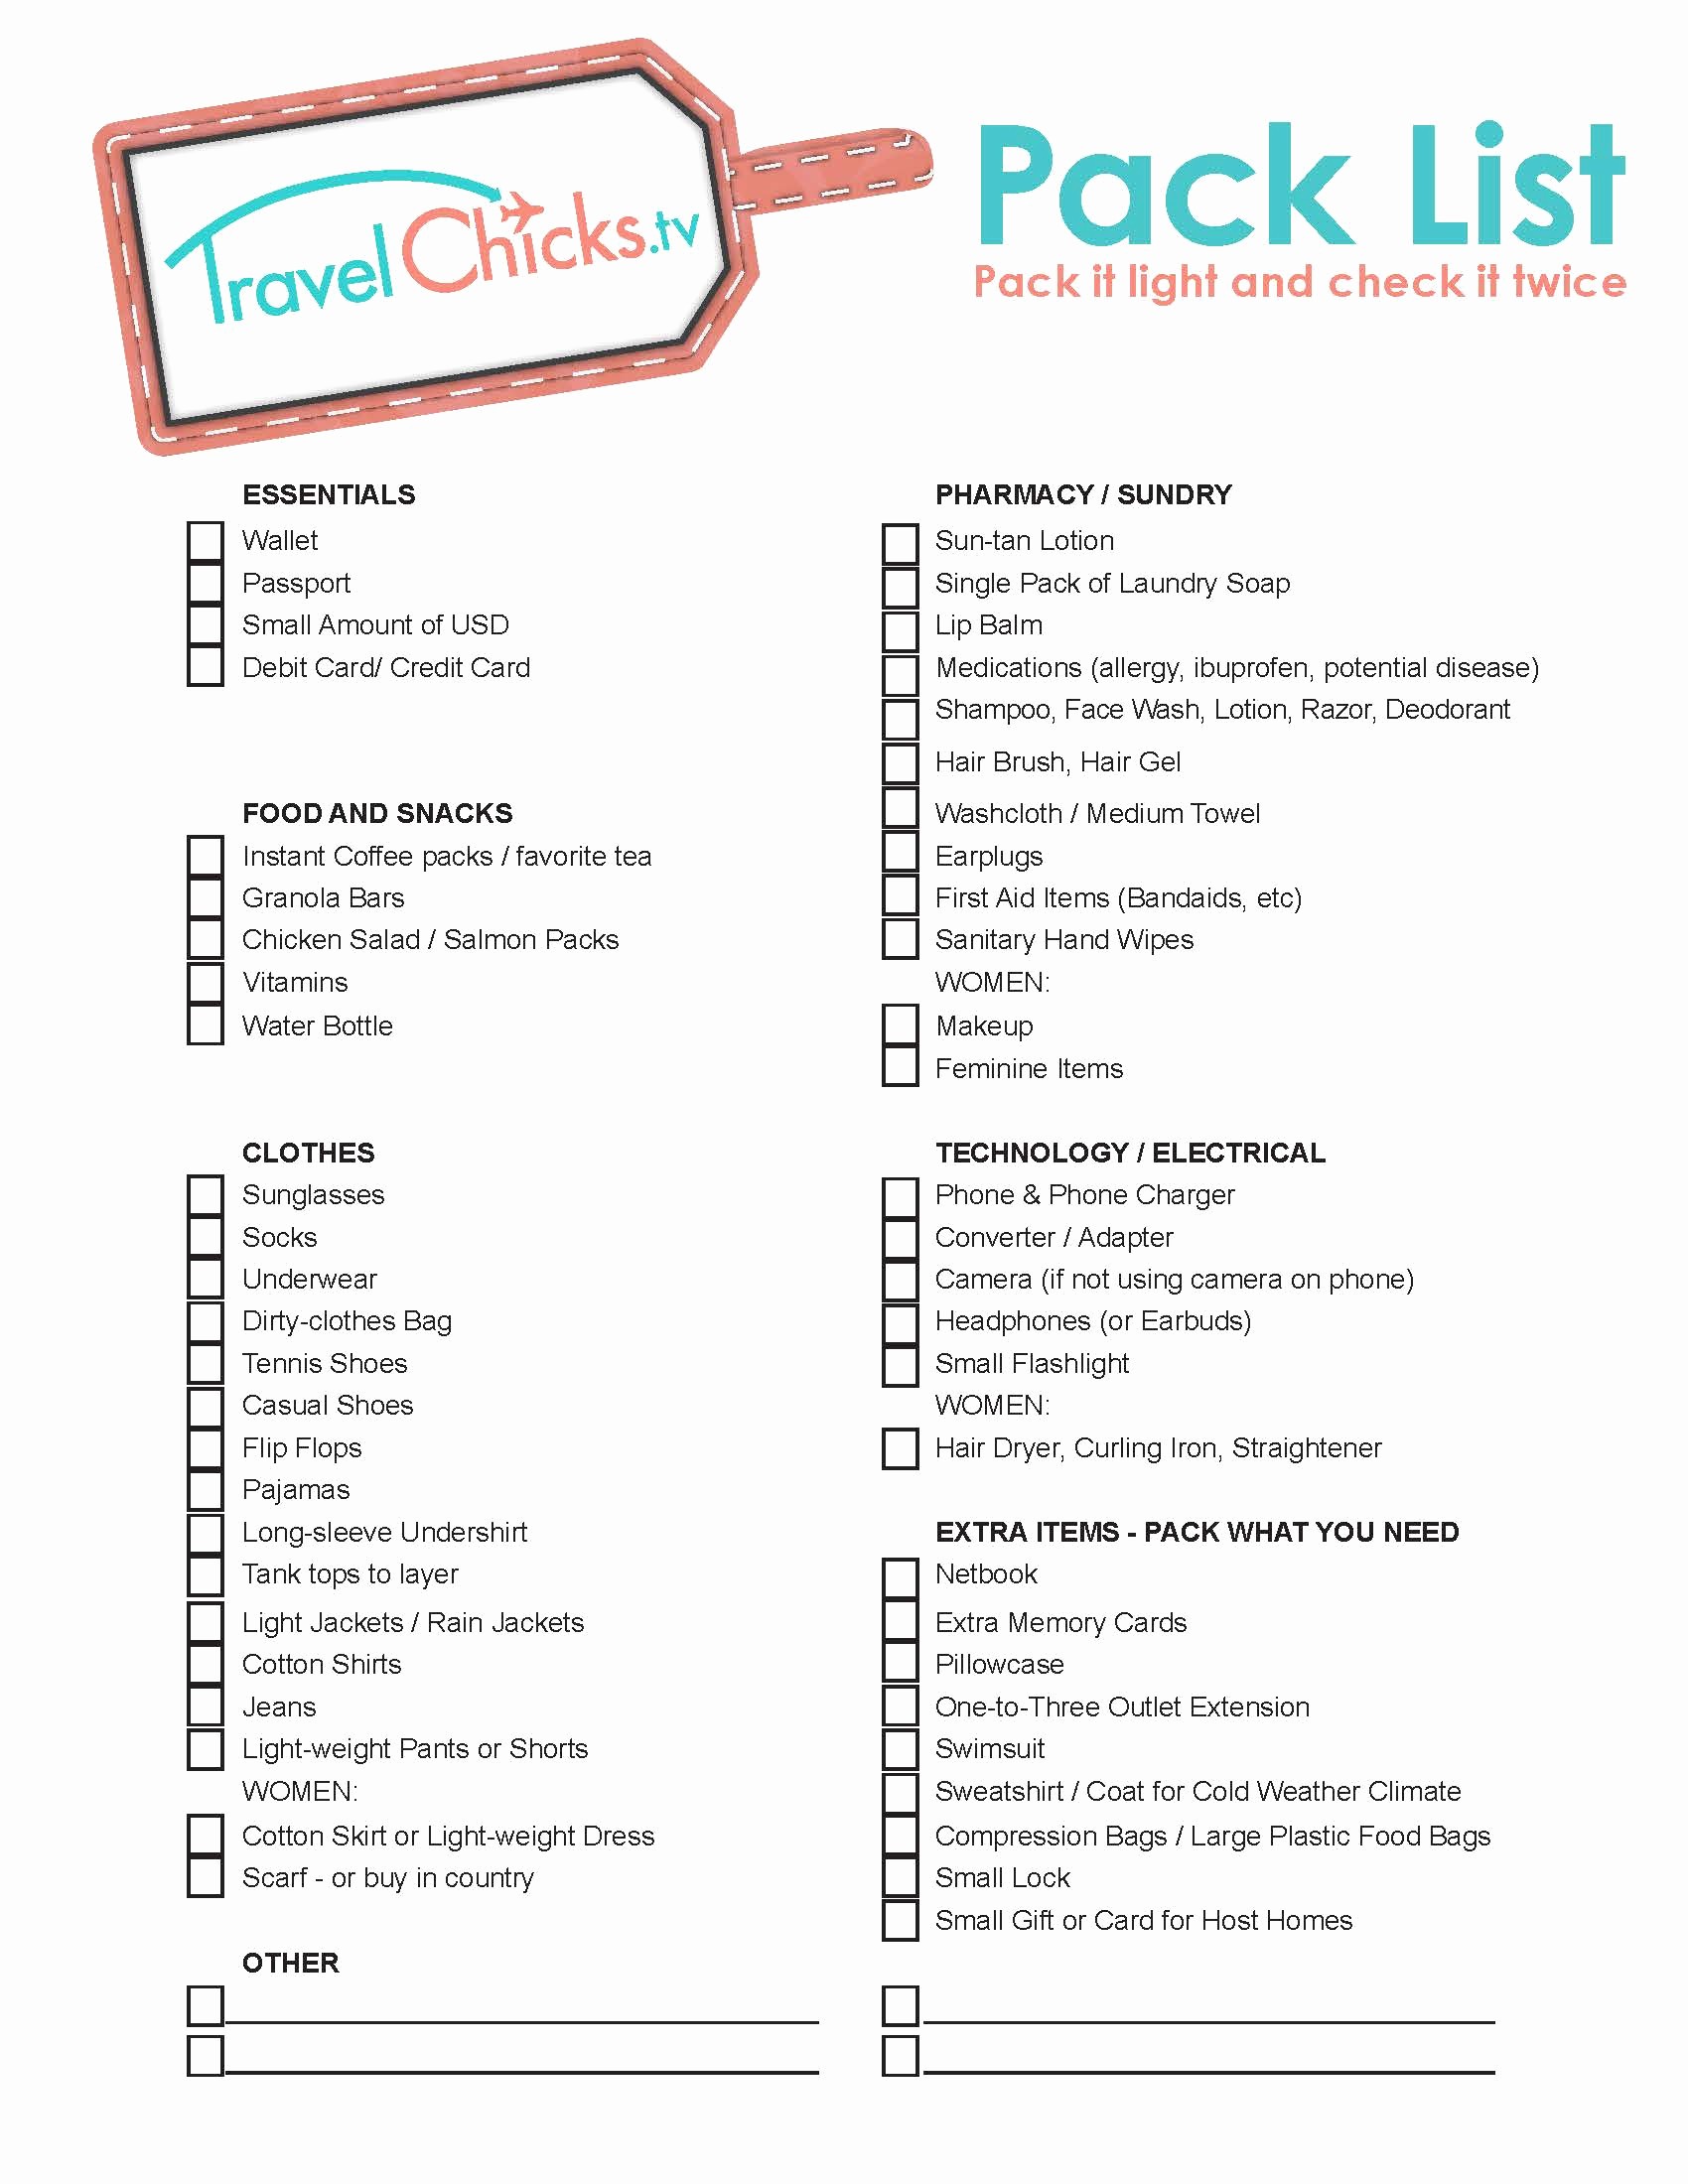 Vacation to Do List Printable Inspirational Travel Packing List Pdf for Women Travel Chicks